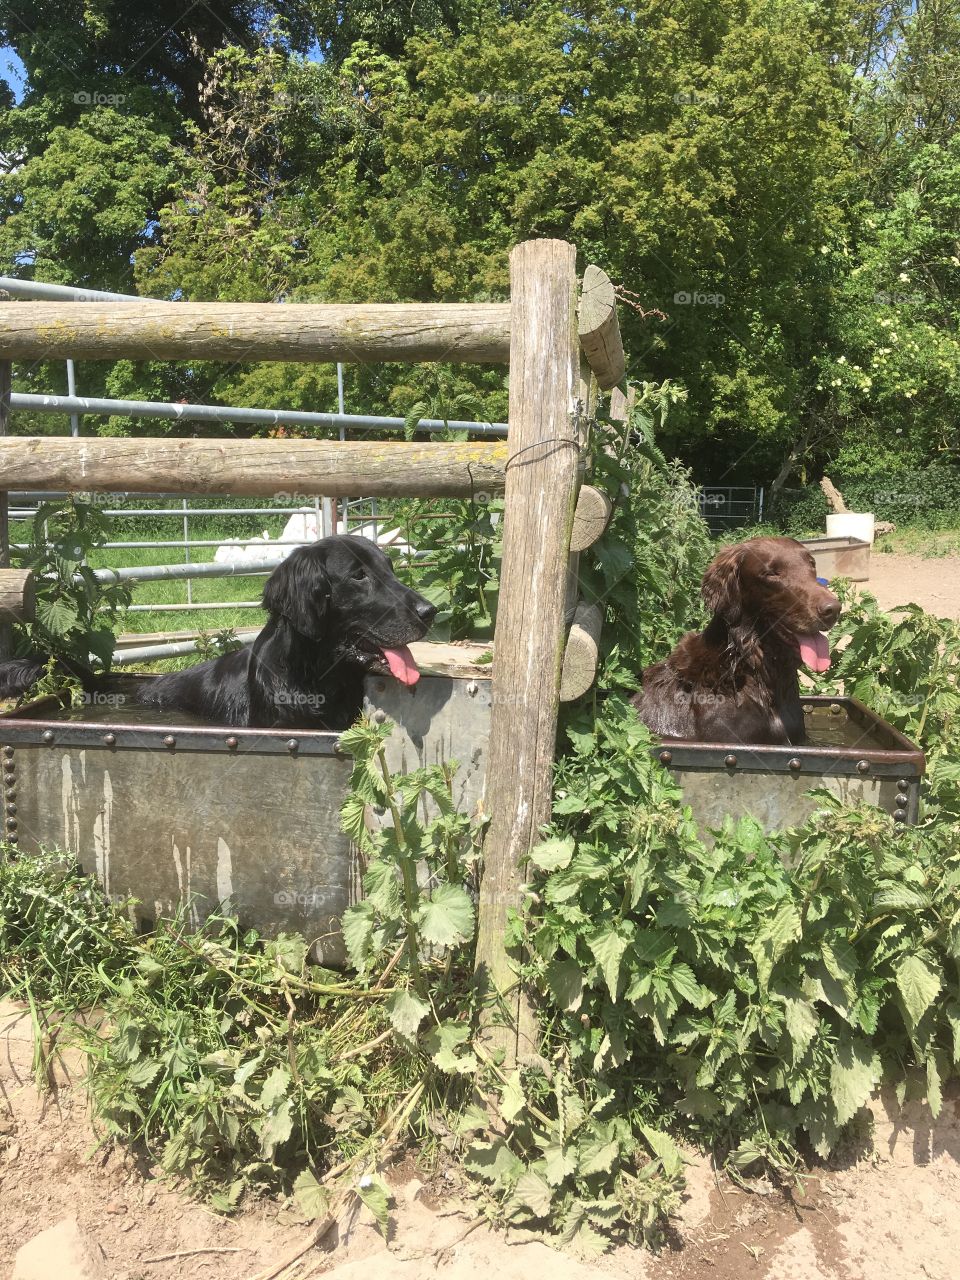 Two very hot flatcoat retrievers have been running on a lovely Hot summer day. Now it is time to cool off in the cow’s water trough.